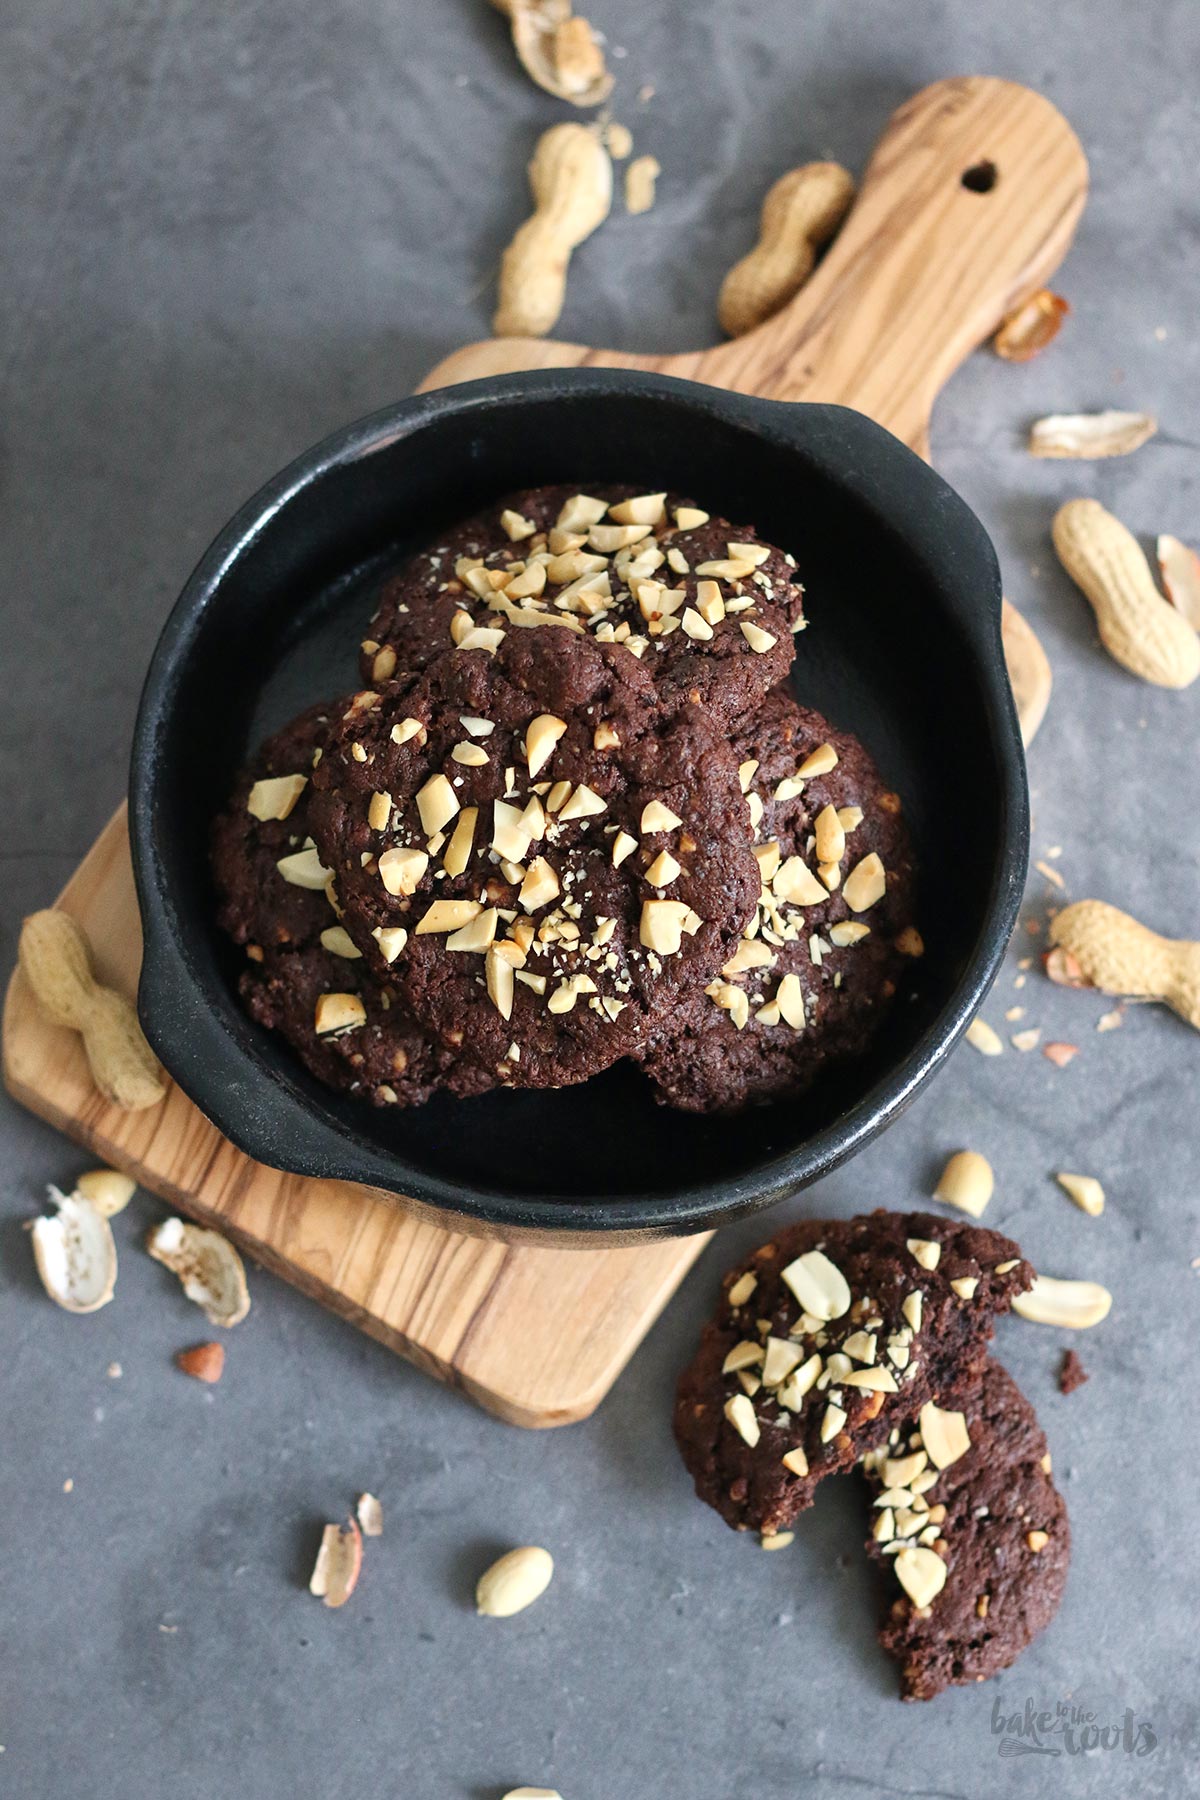 Vegan Peanut Butter Chocolate Fudge Cookies | Bake to the roots